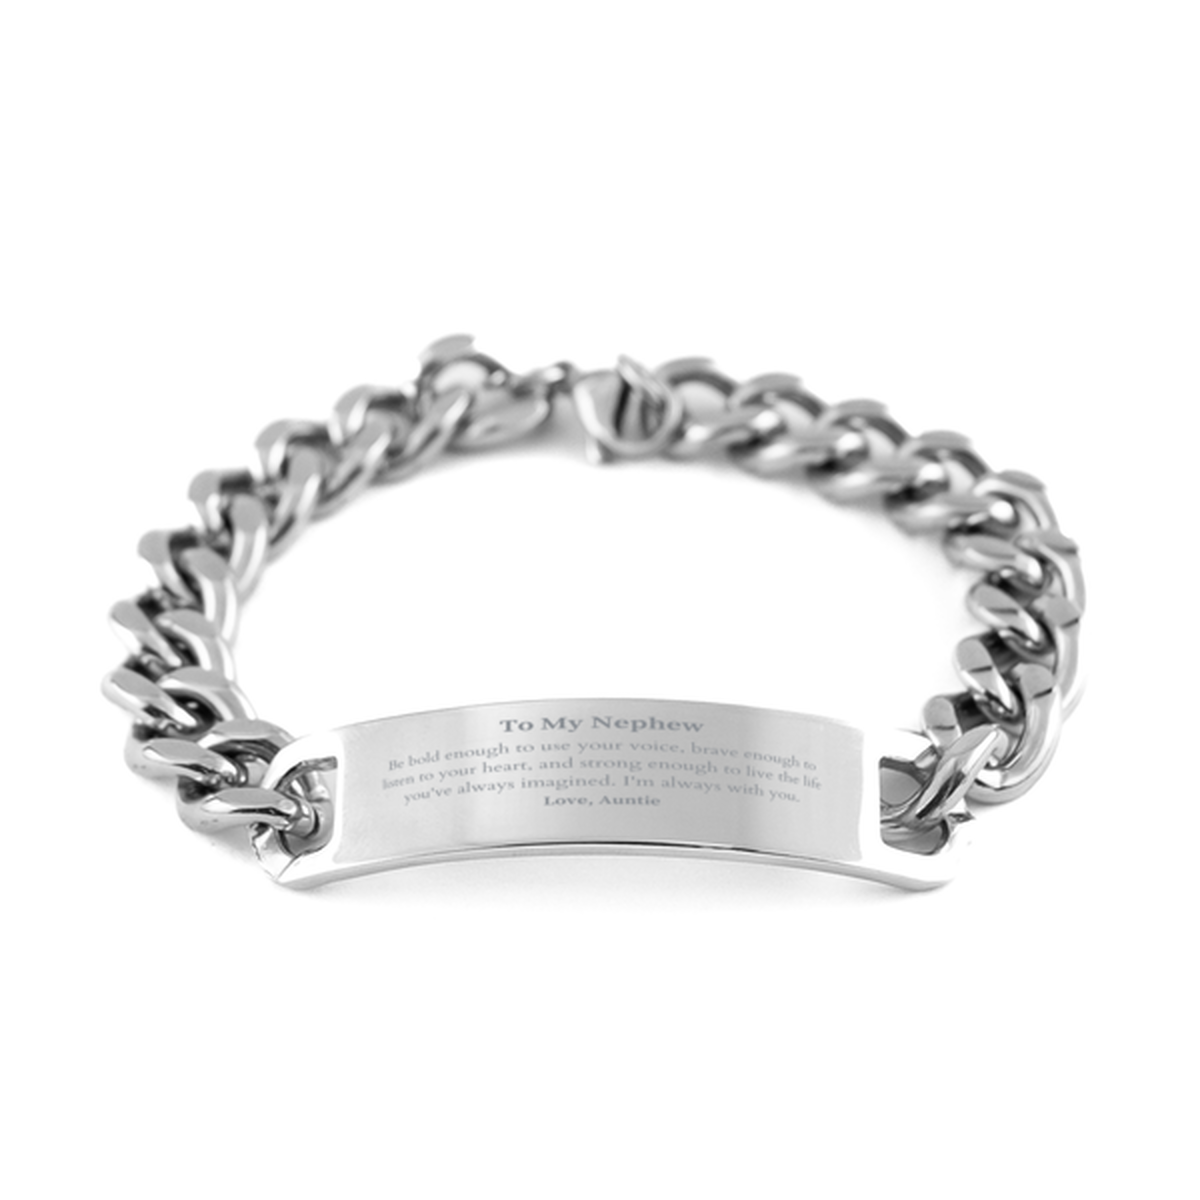 Keepsake Nephew Cuban Chain Stainless Steel Bracelet Gift Idea Graduation Christmas Birthday Nephew from Auntie, Nephew Be bold enough to use your voice, brave enough to listen to your heart. Love, Auntie